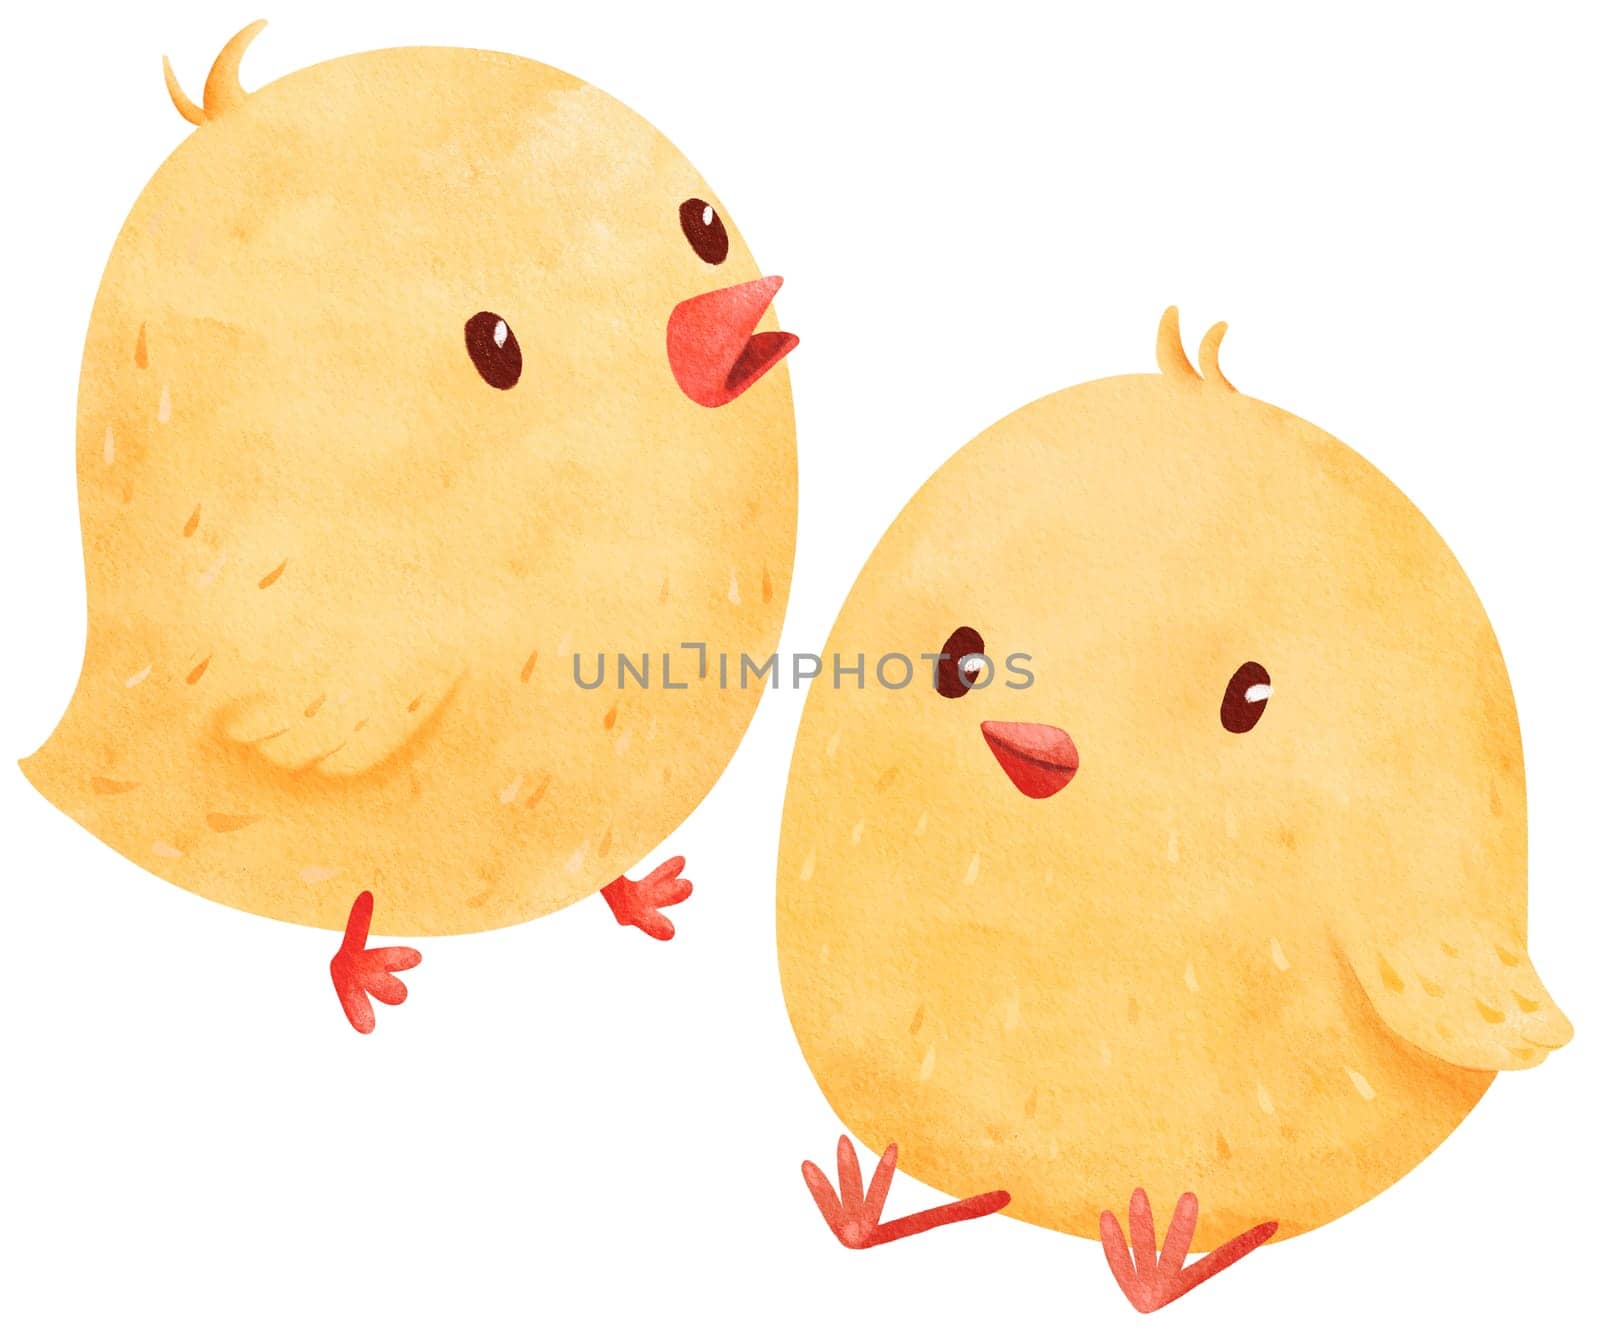 Set of two newborn fluffy chicks. Children's illustration in watercolor, capturing the adorable charm of little chicks. for a sweet and endearing atmosphere, for use in nursery designs, cards.